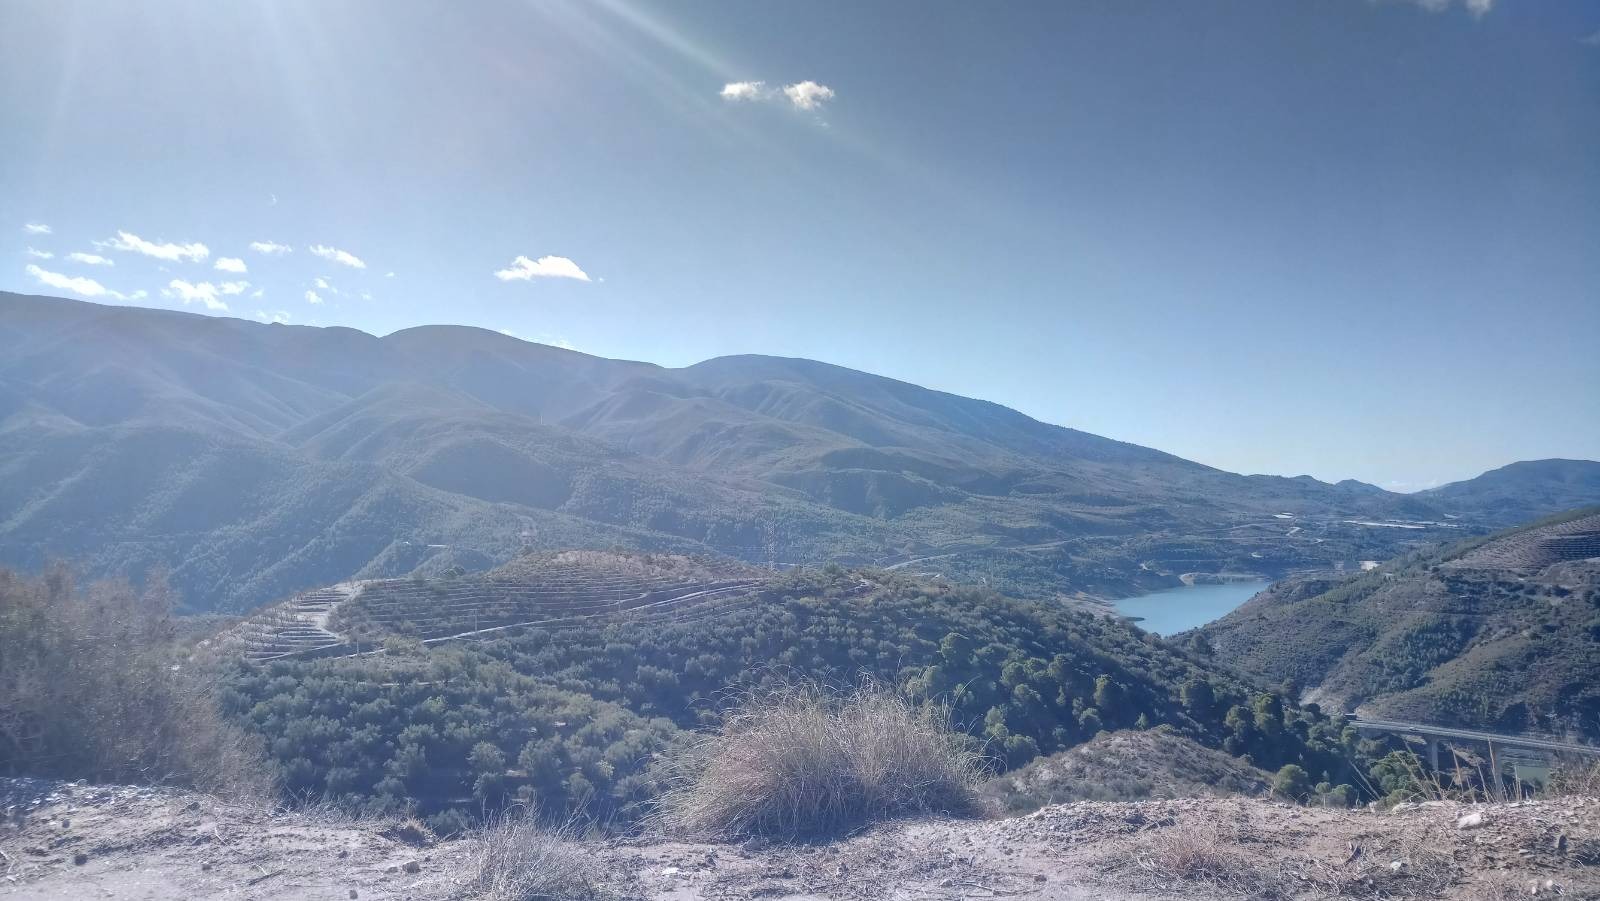 a panaromic view over the hills of the alpujarras